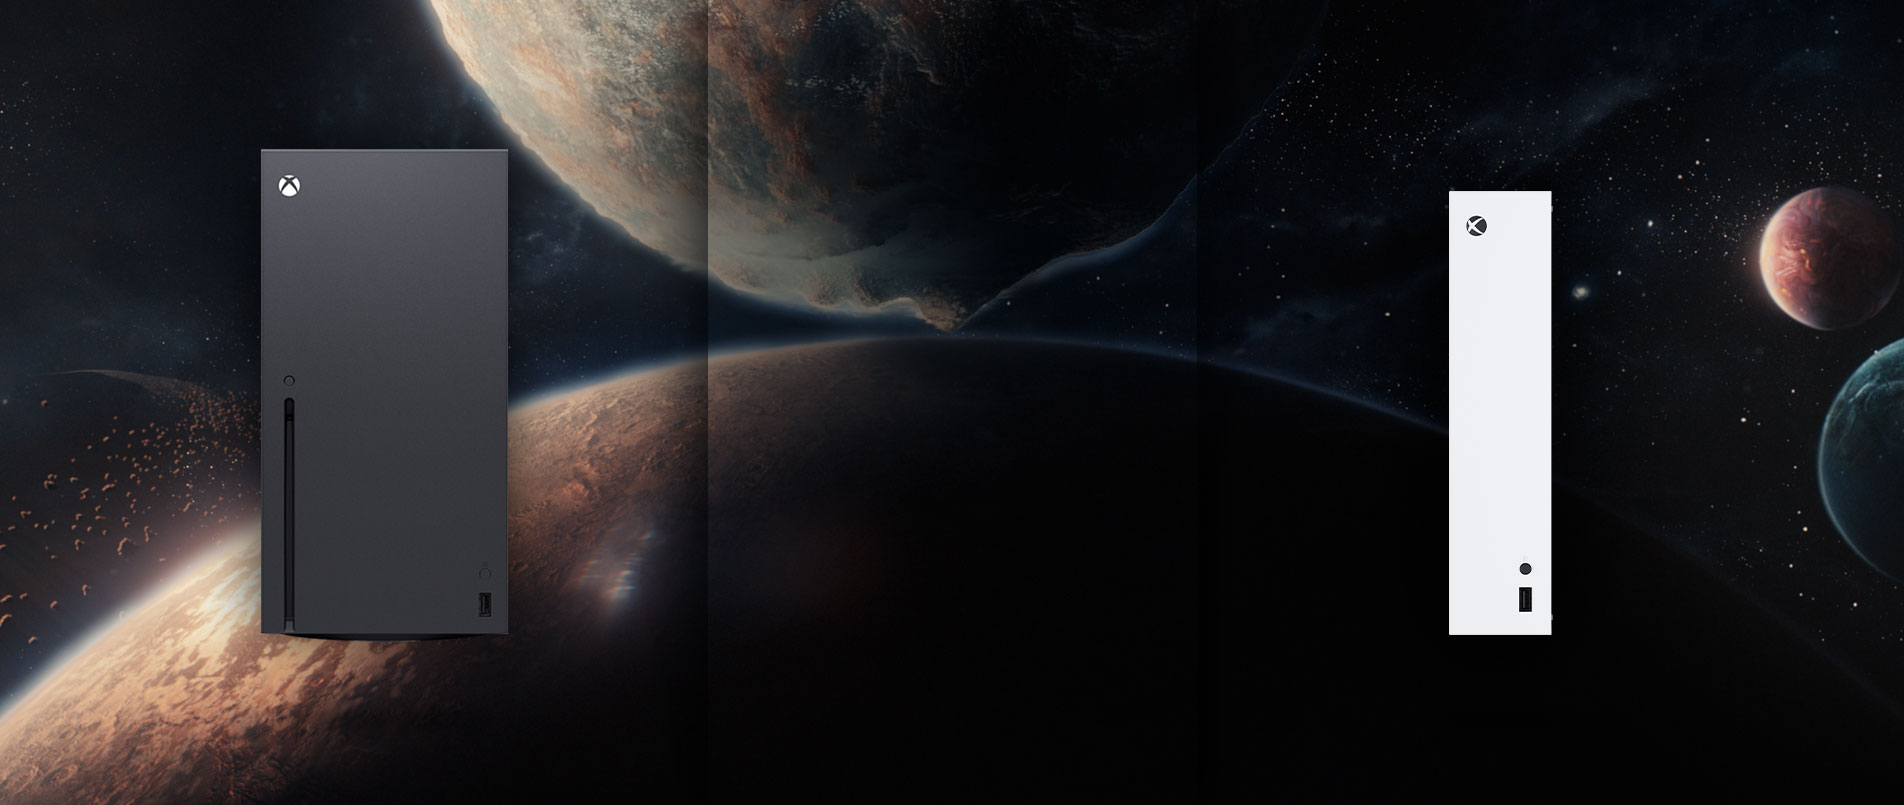 Xbox Series X and Xbox Series S consoles with two planets in the background